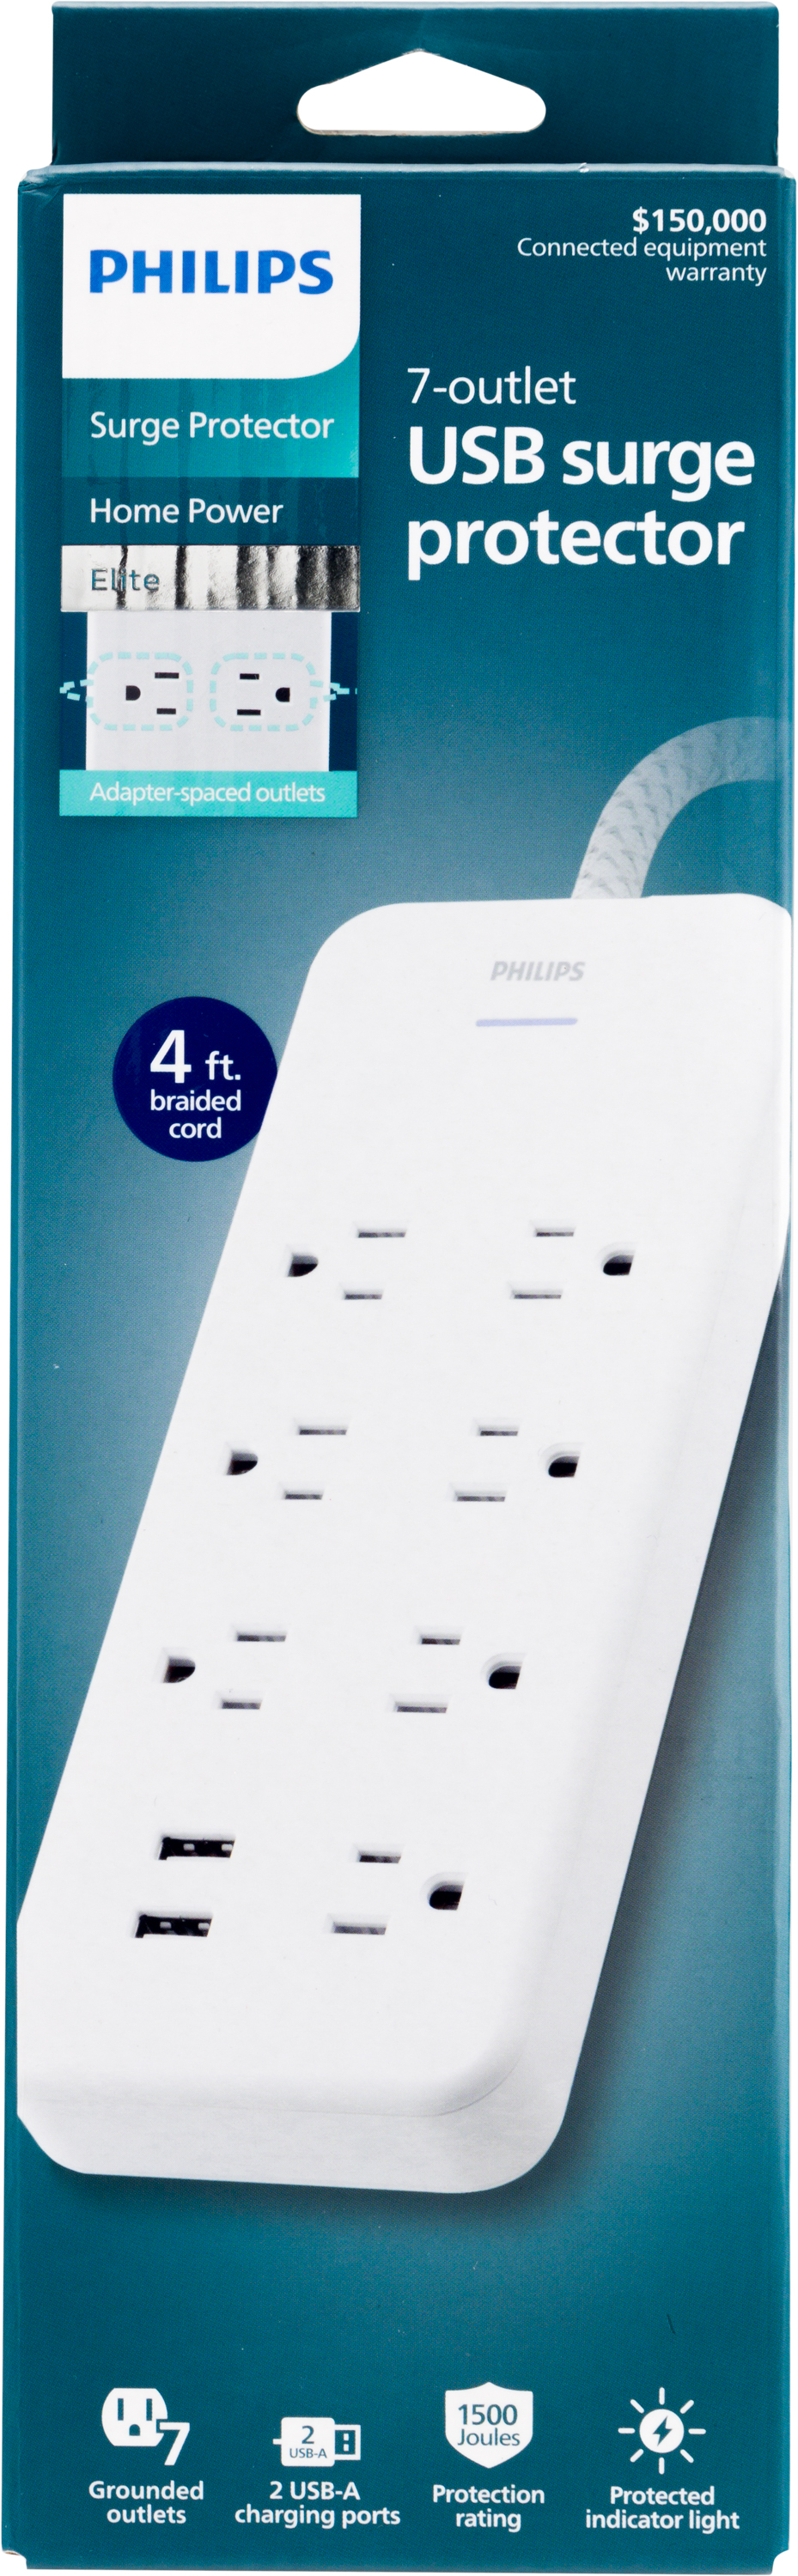 Philips 7-Outlet Surge Protector, 2USBA, 4ft Braided Cord, White, - image 2 of 11